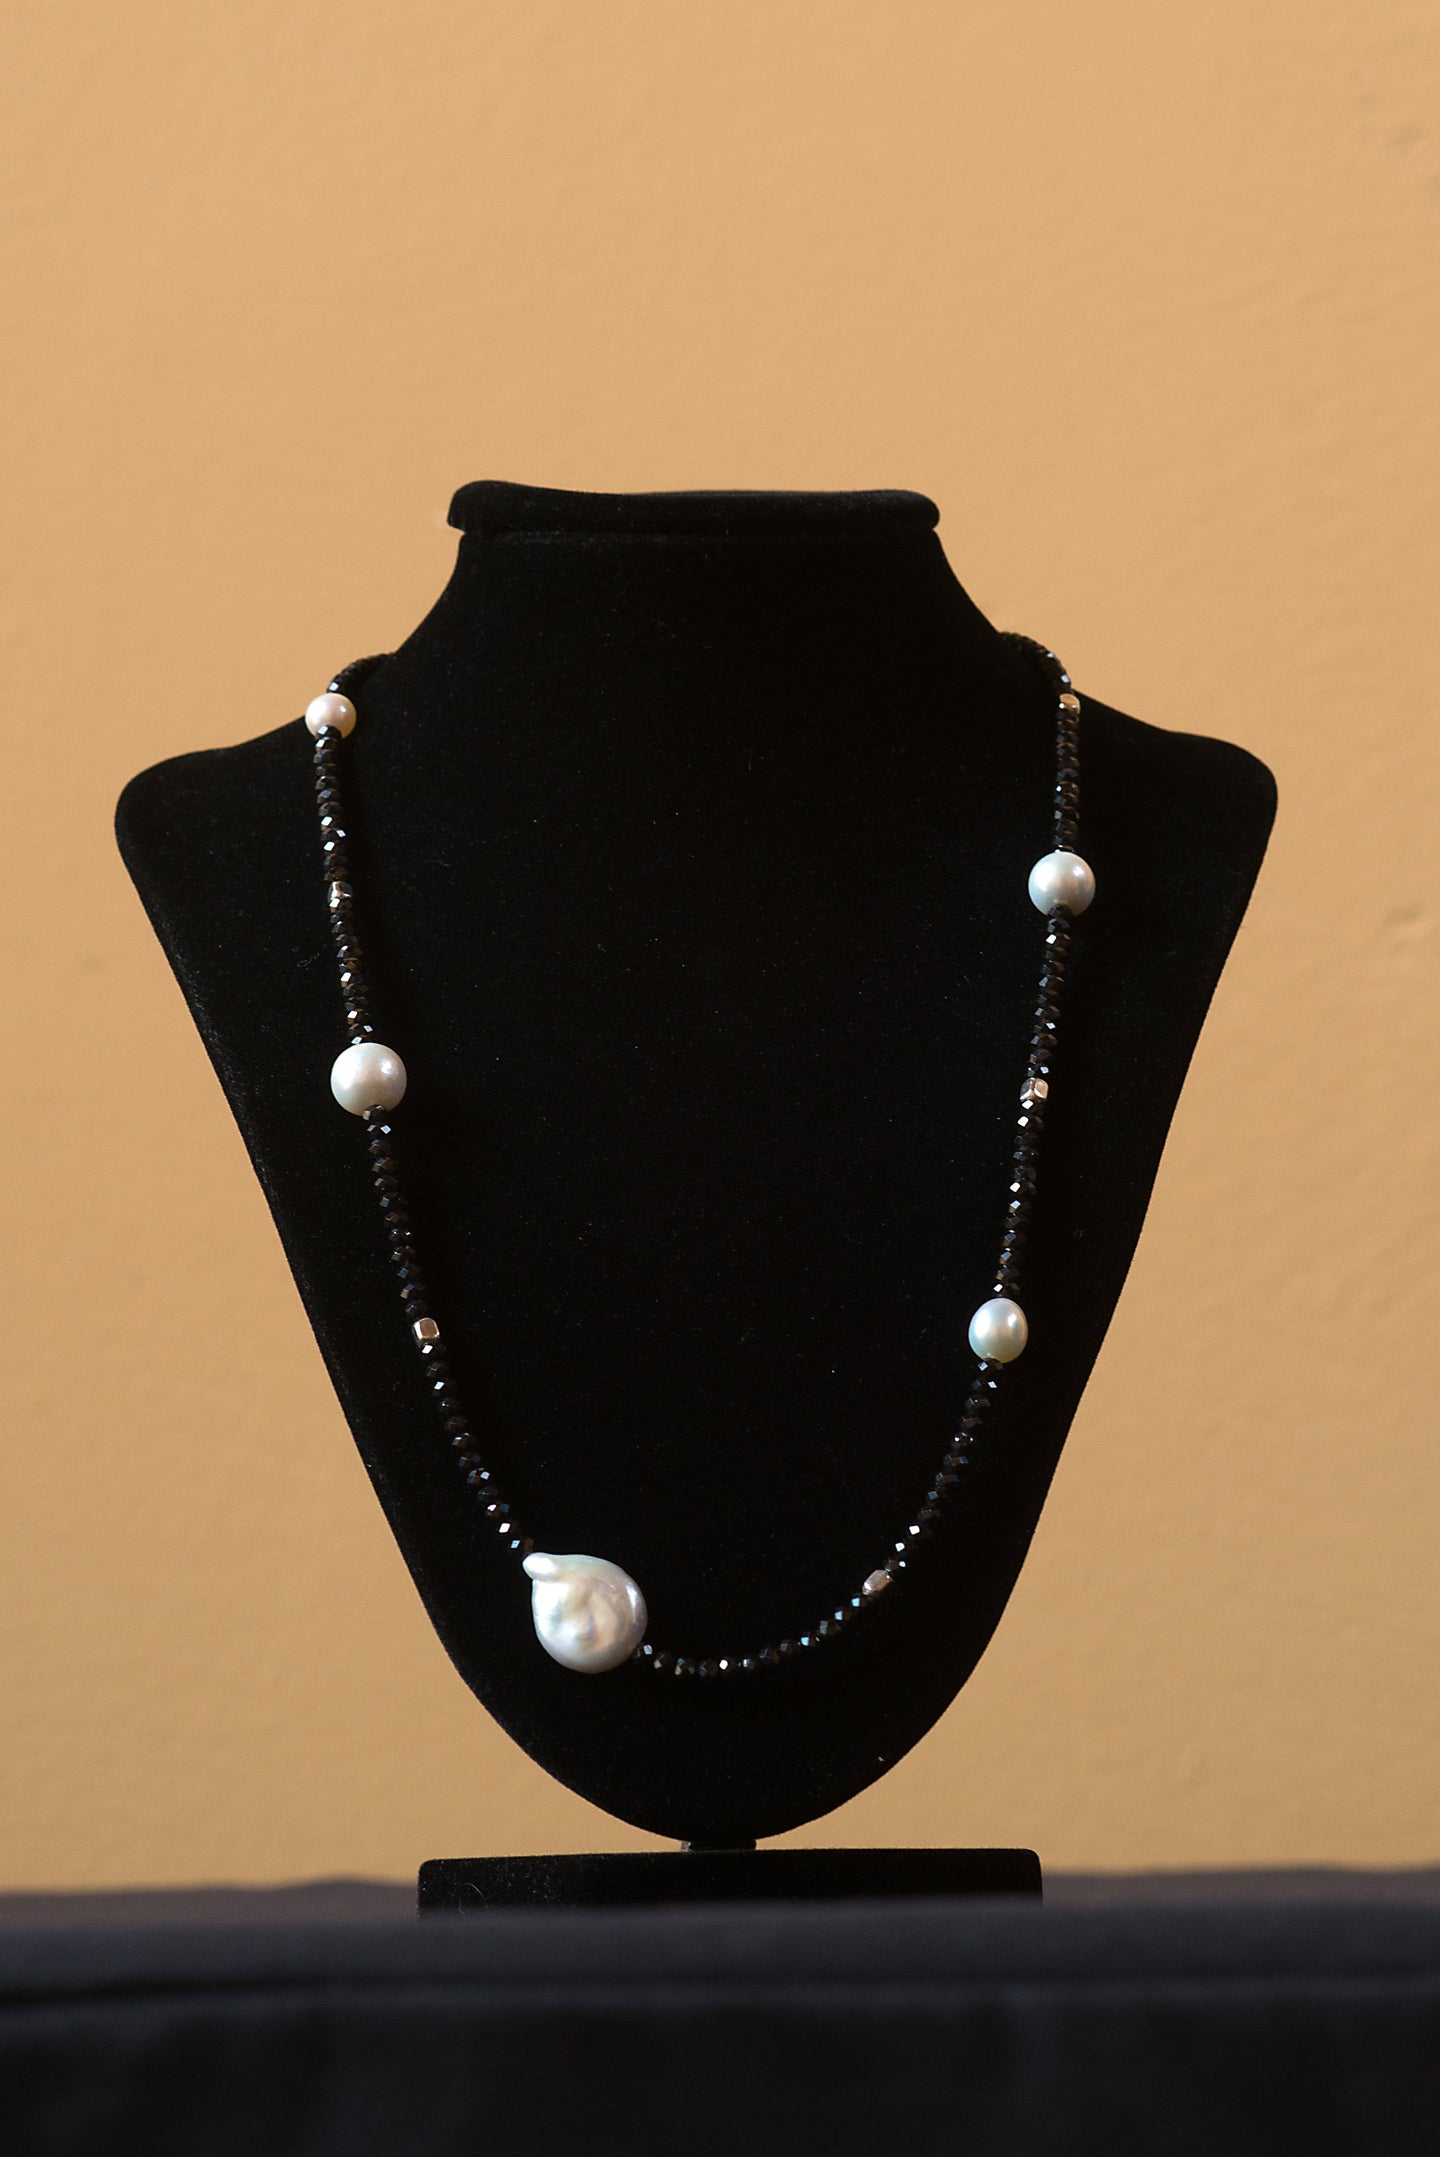 Necklace - Black Spinel & Freshwater Pearls